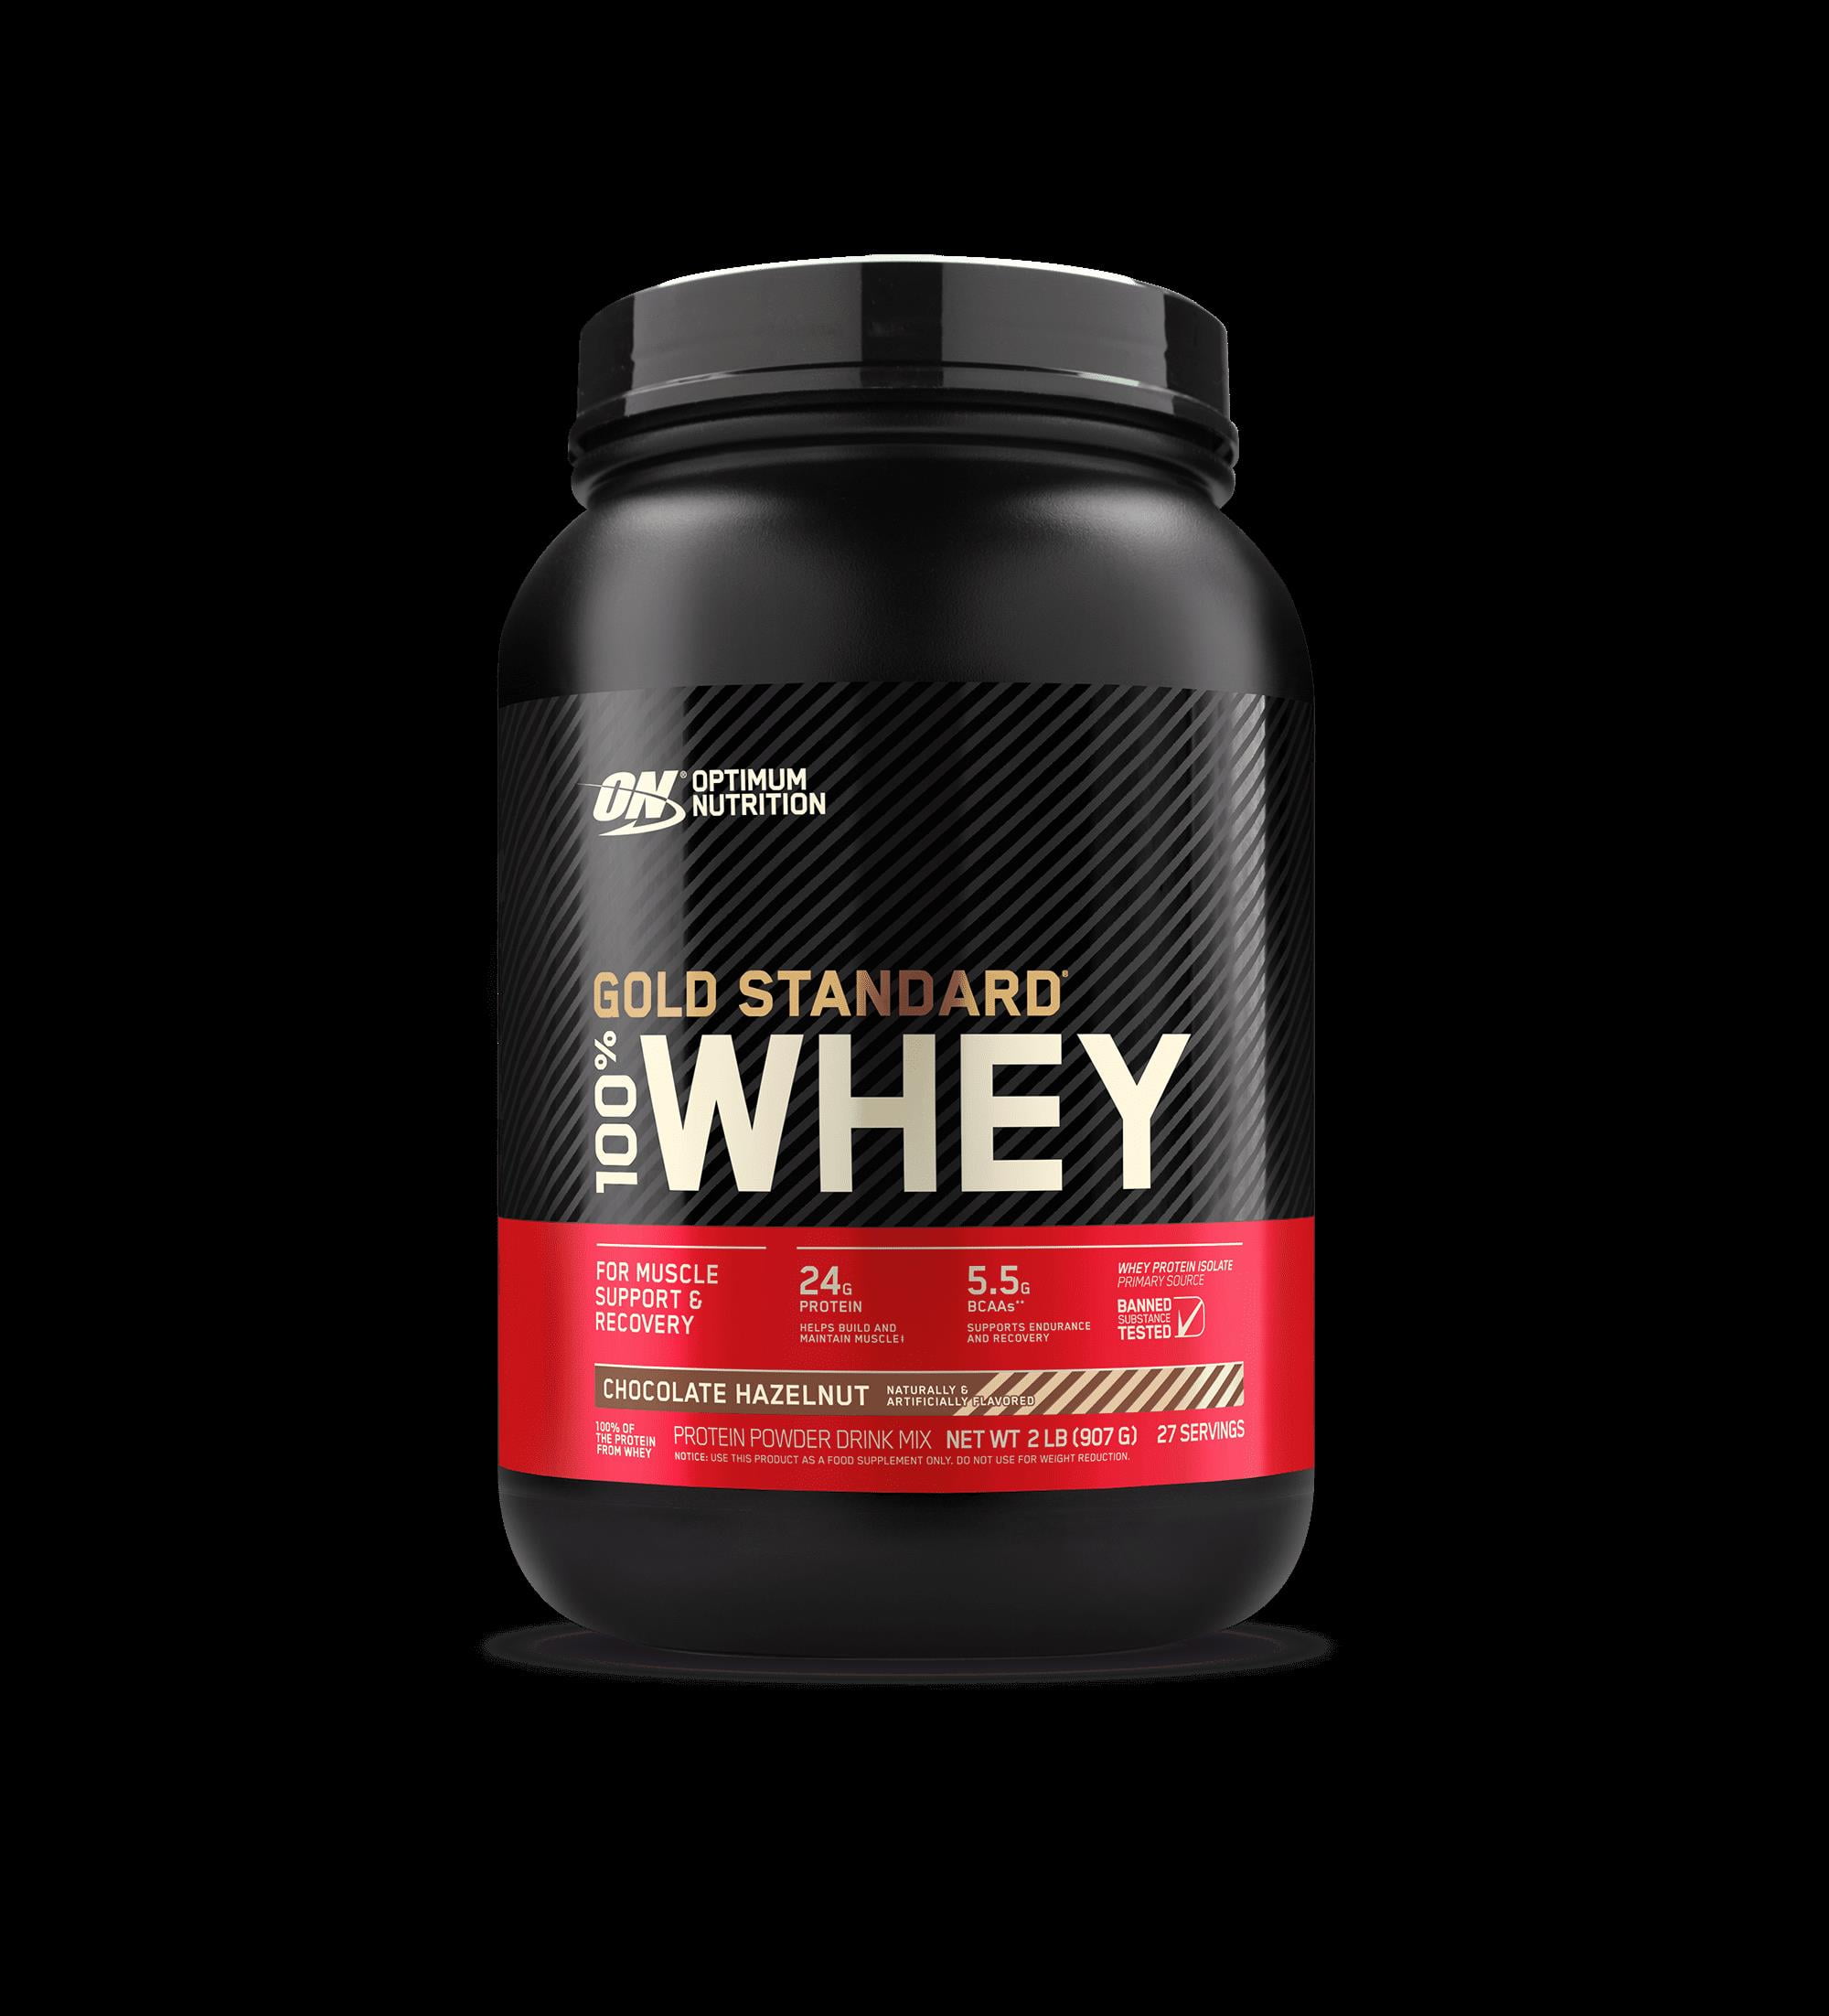 Optimum Nutrition Gold Standard 100% Whey Protein Powder, Chocolate Peanut  Butter, 2 Pound (Pack of 1)